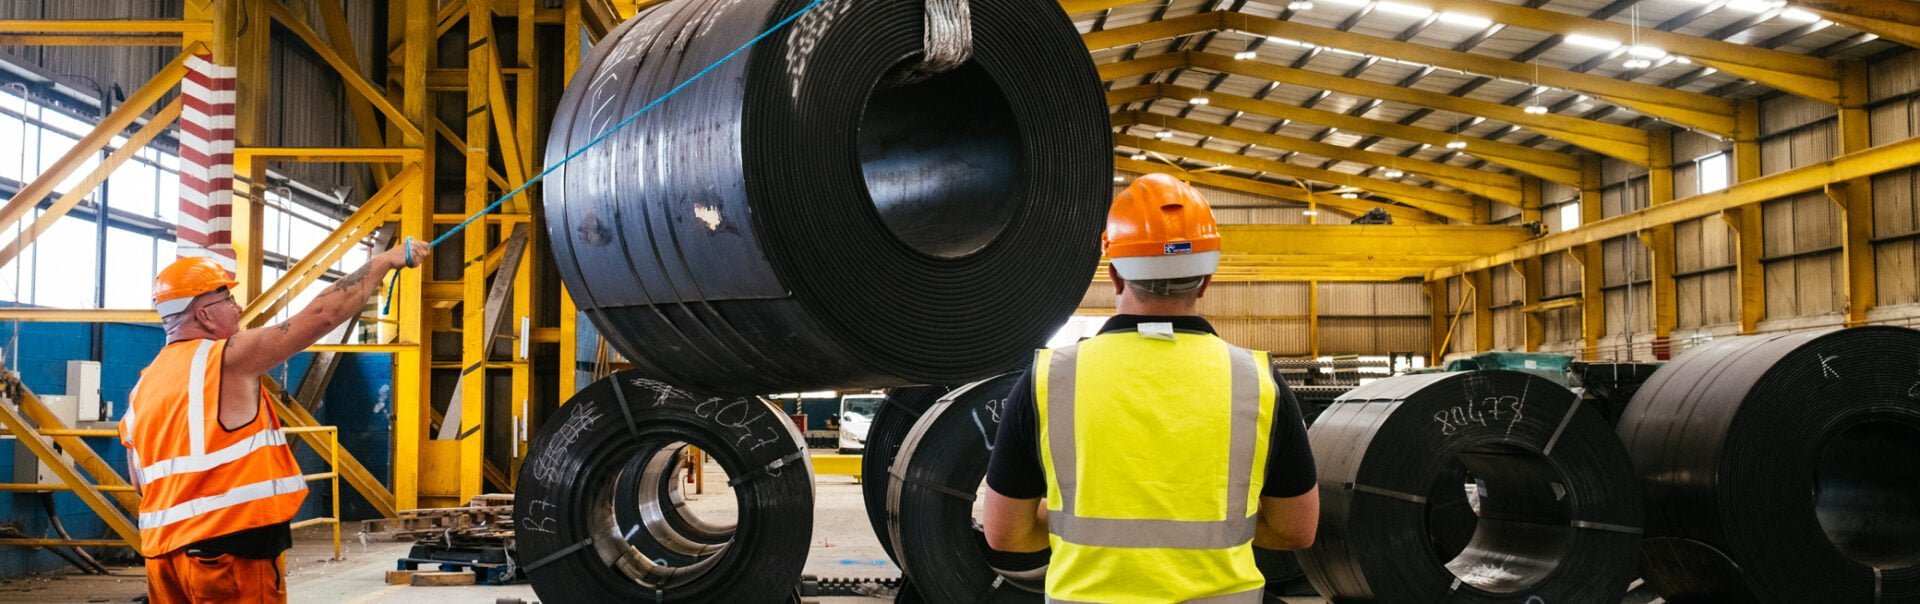 Hartlepool steel coil storage facility receives its first shipments